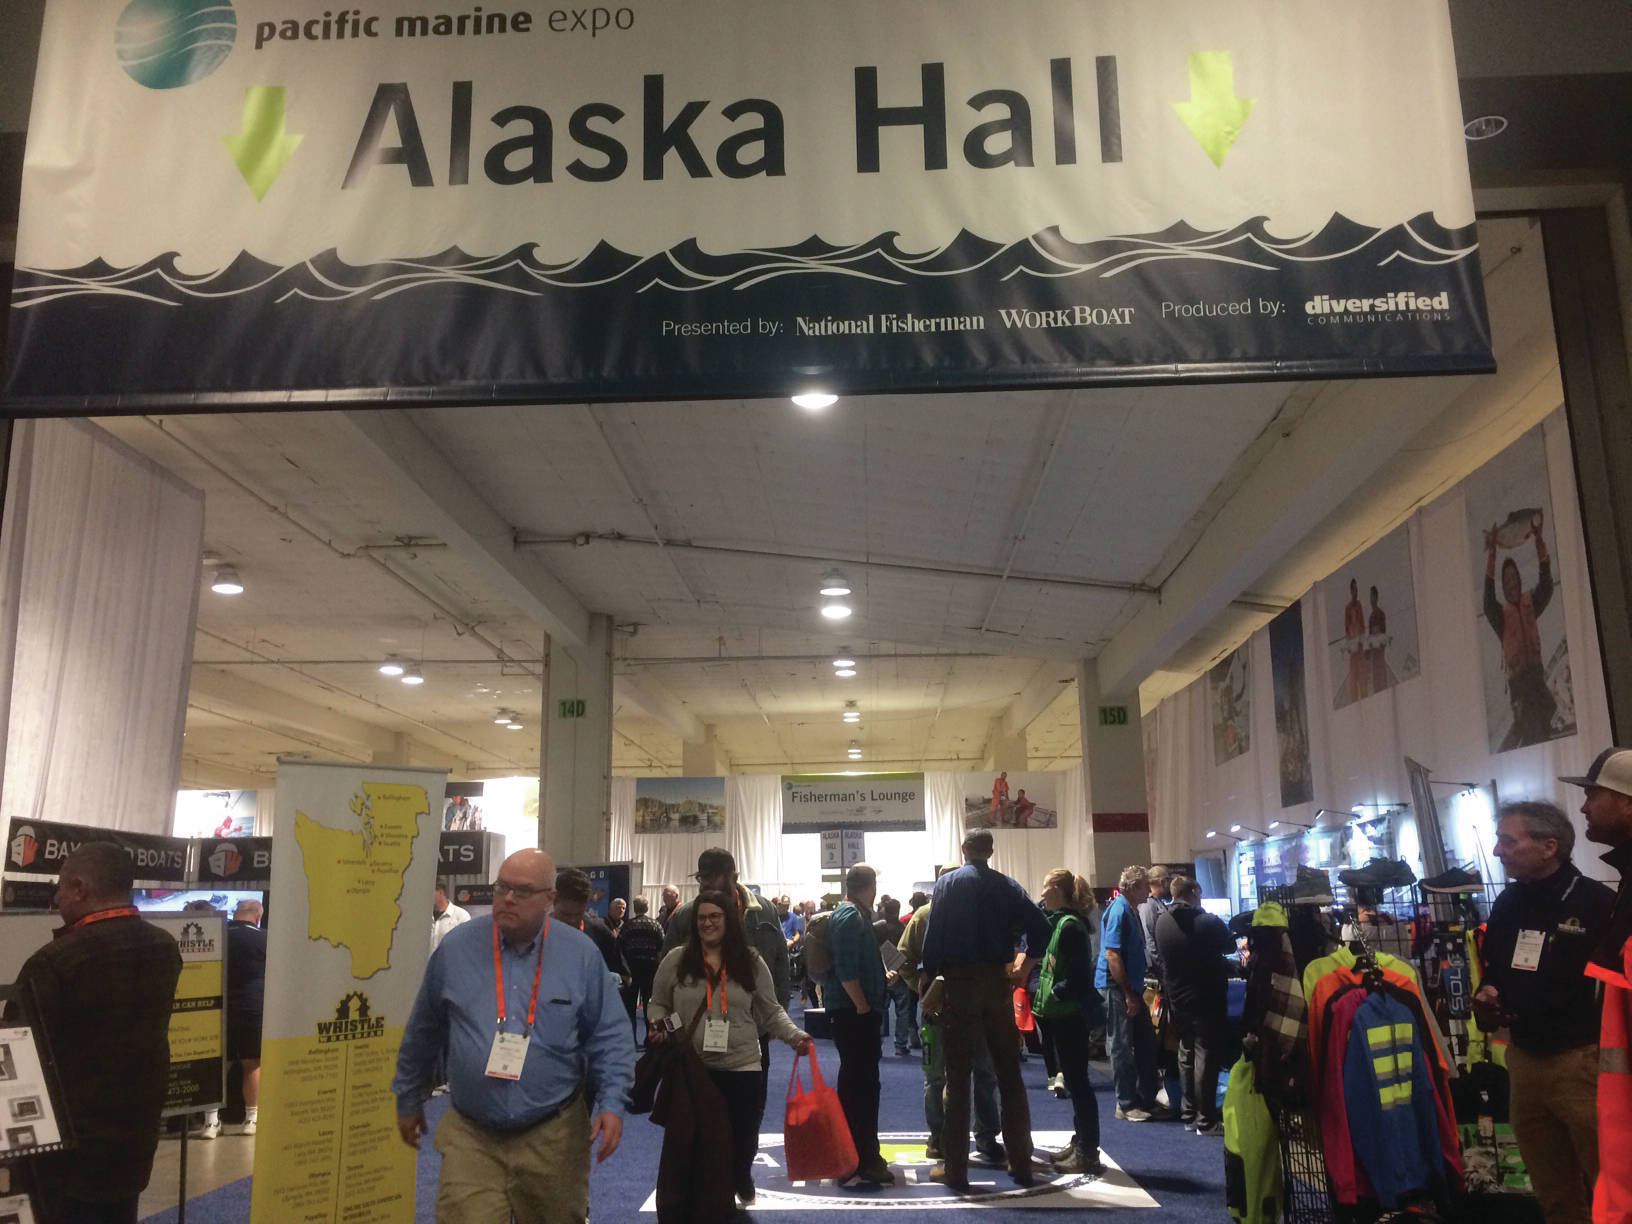 Pacific Marine Expo’s “Alaska Hall” was aptly named for the number of booths representing Alaska state agencies, boroughs, cities, businesses and issues of state-wide importance. The hall was home to the city of Homer and Homer Marine Trades Association booth during the Nov. 21-23, 2019, event in Seattle. (Photo by McKibben Jackinsky)